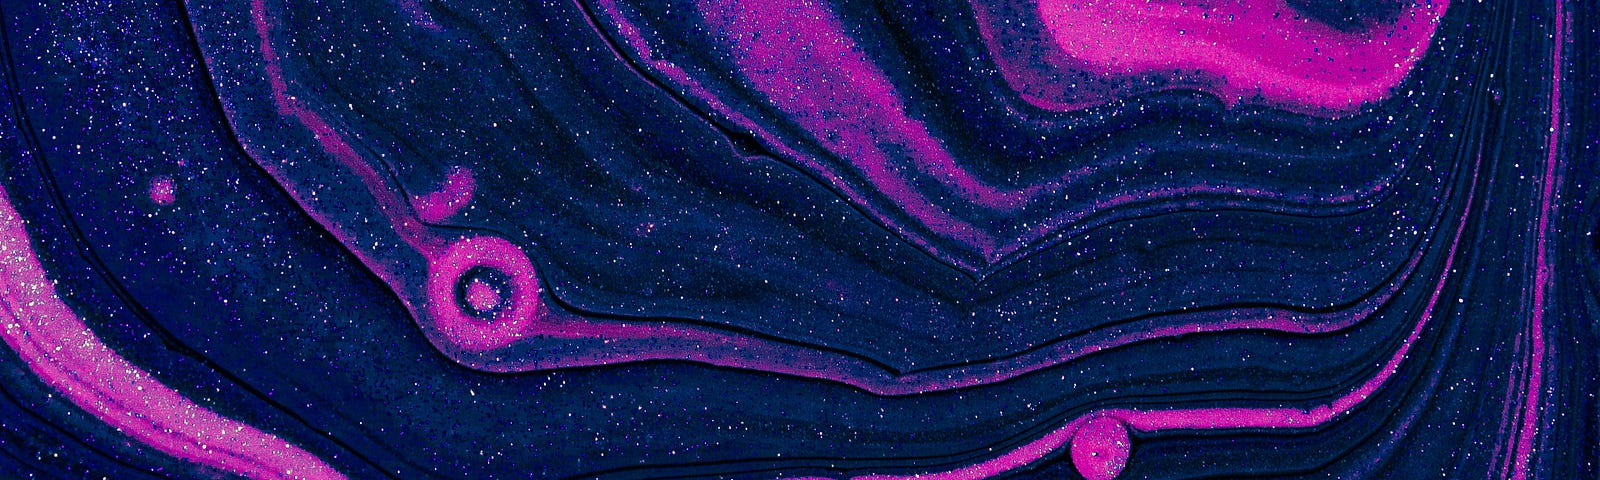 Purple pink and dark blue abstract sandy texture